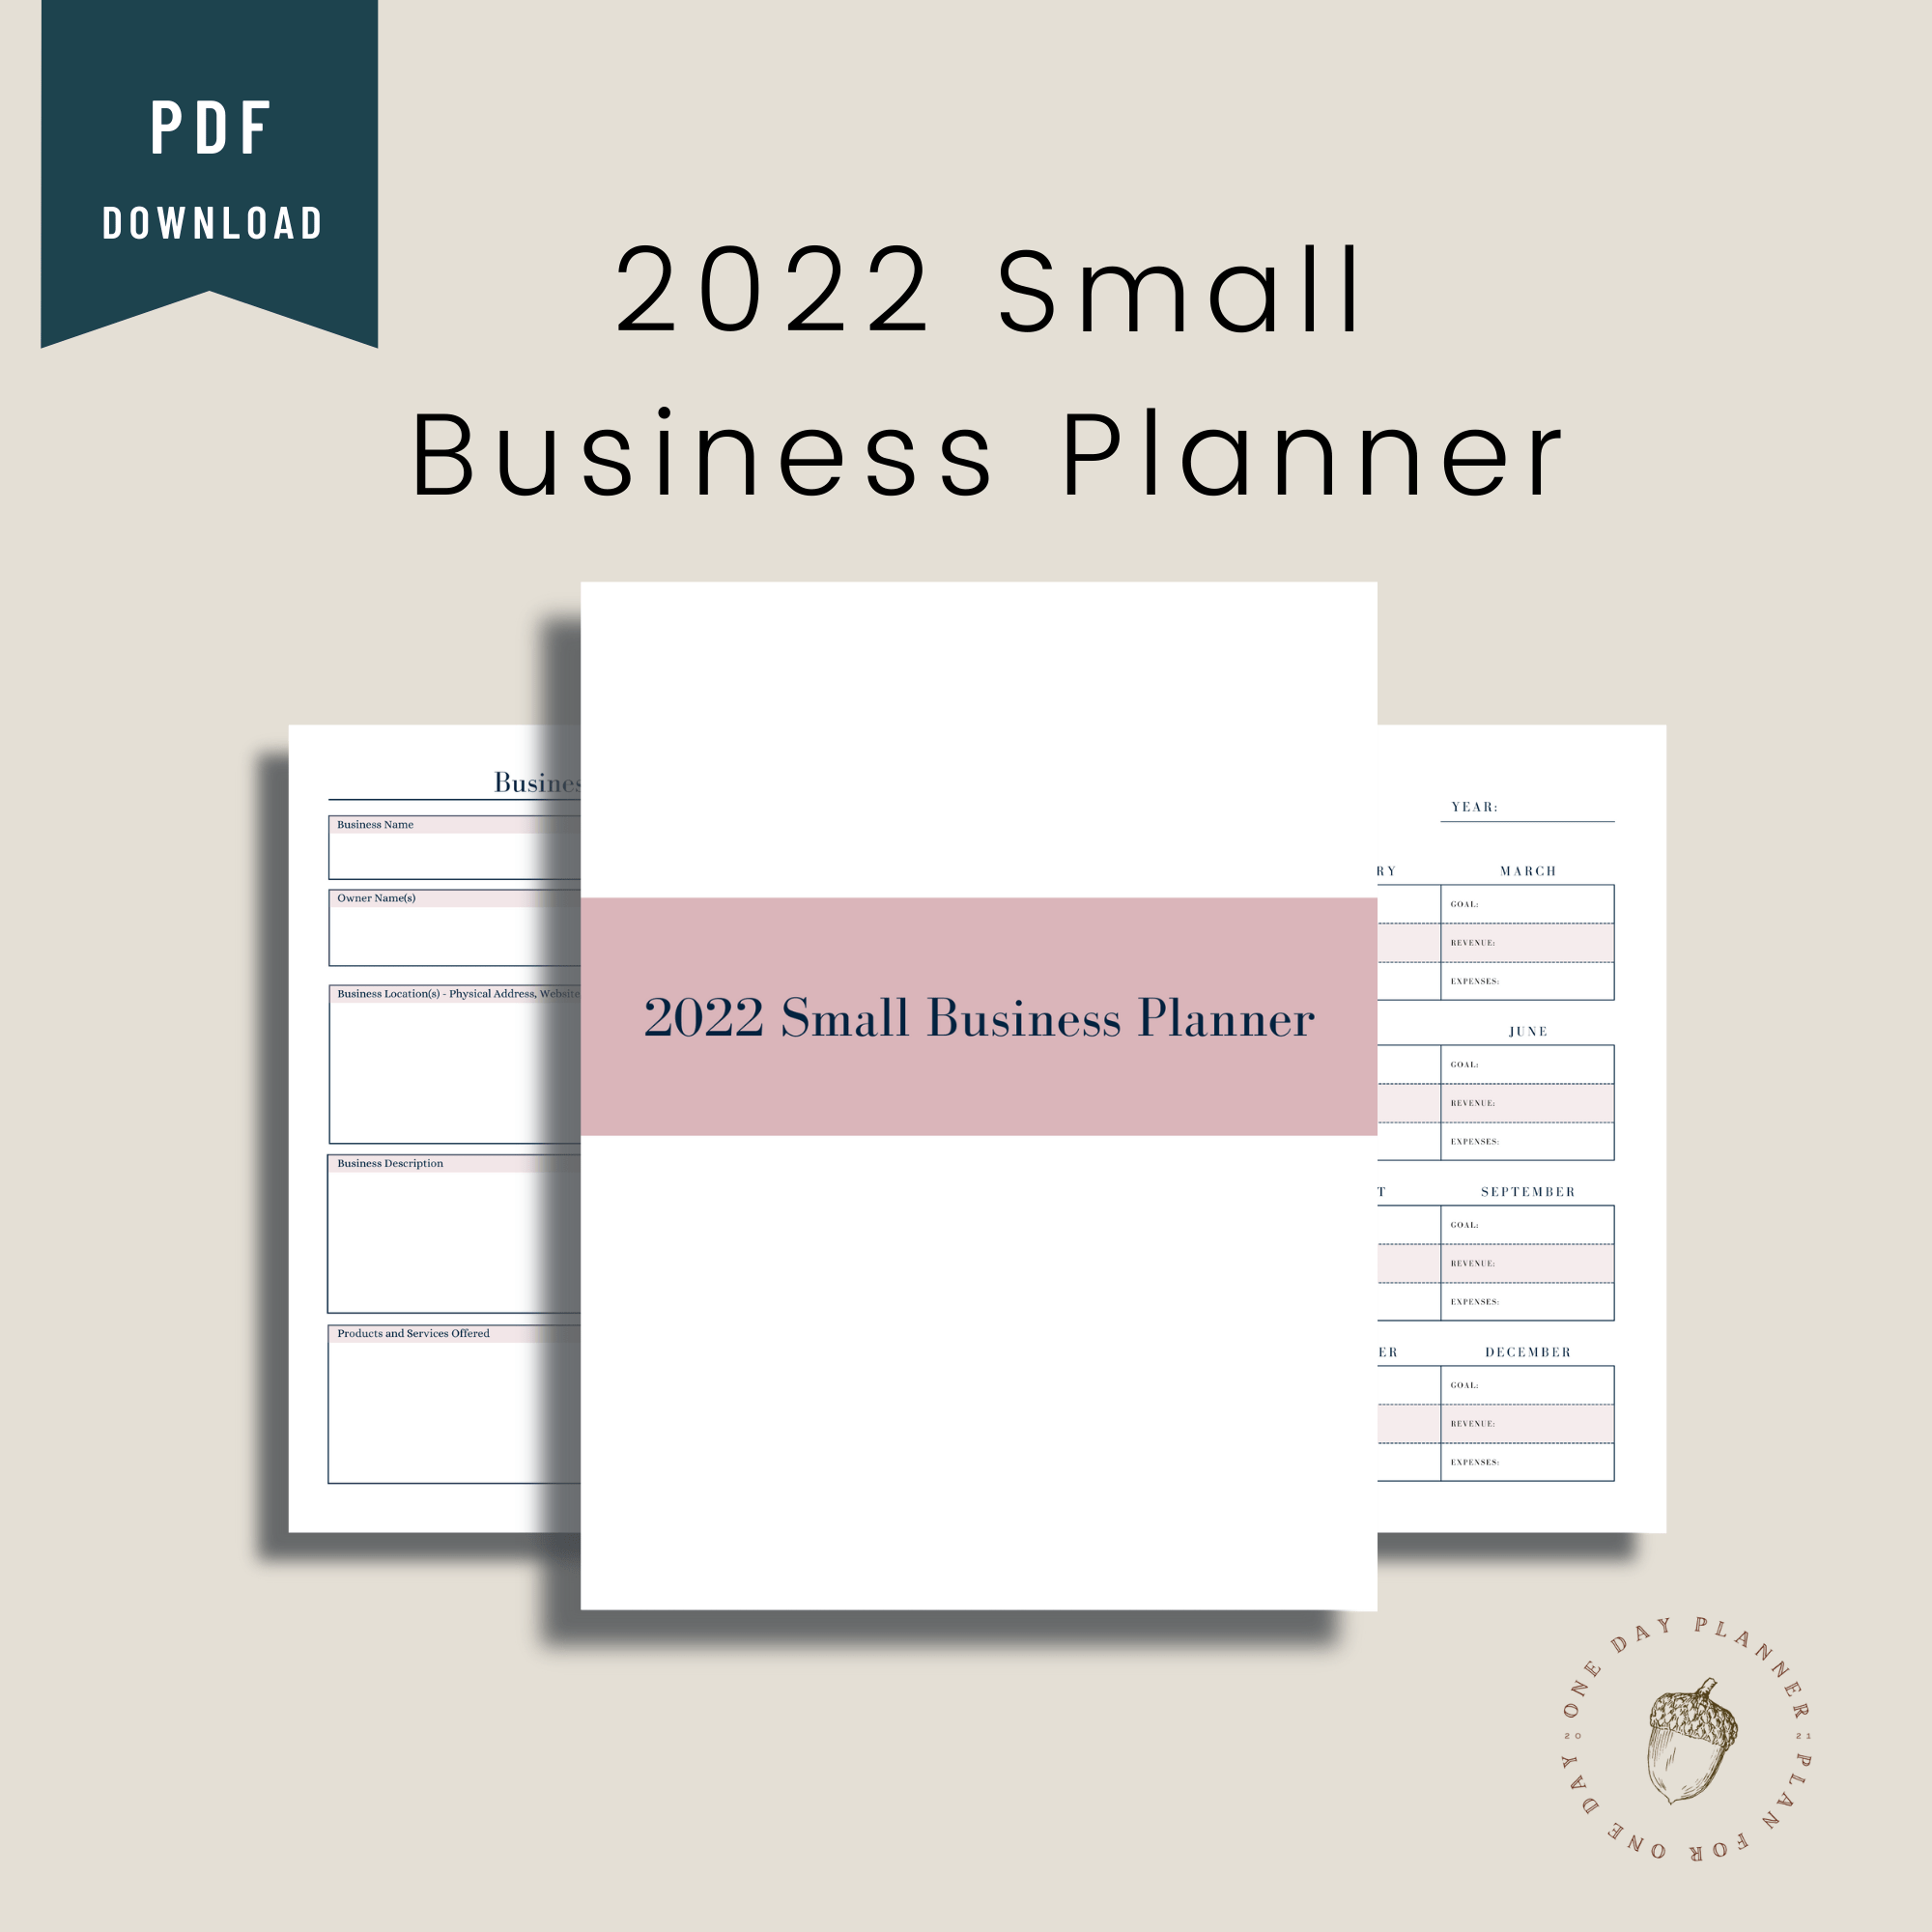 small business planner 2022 pdf